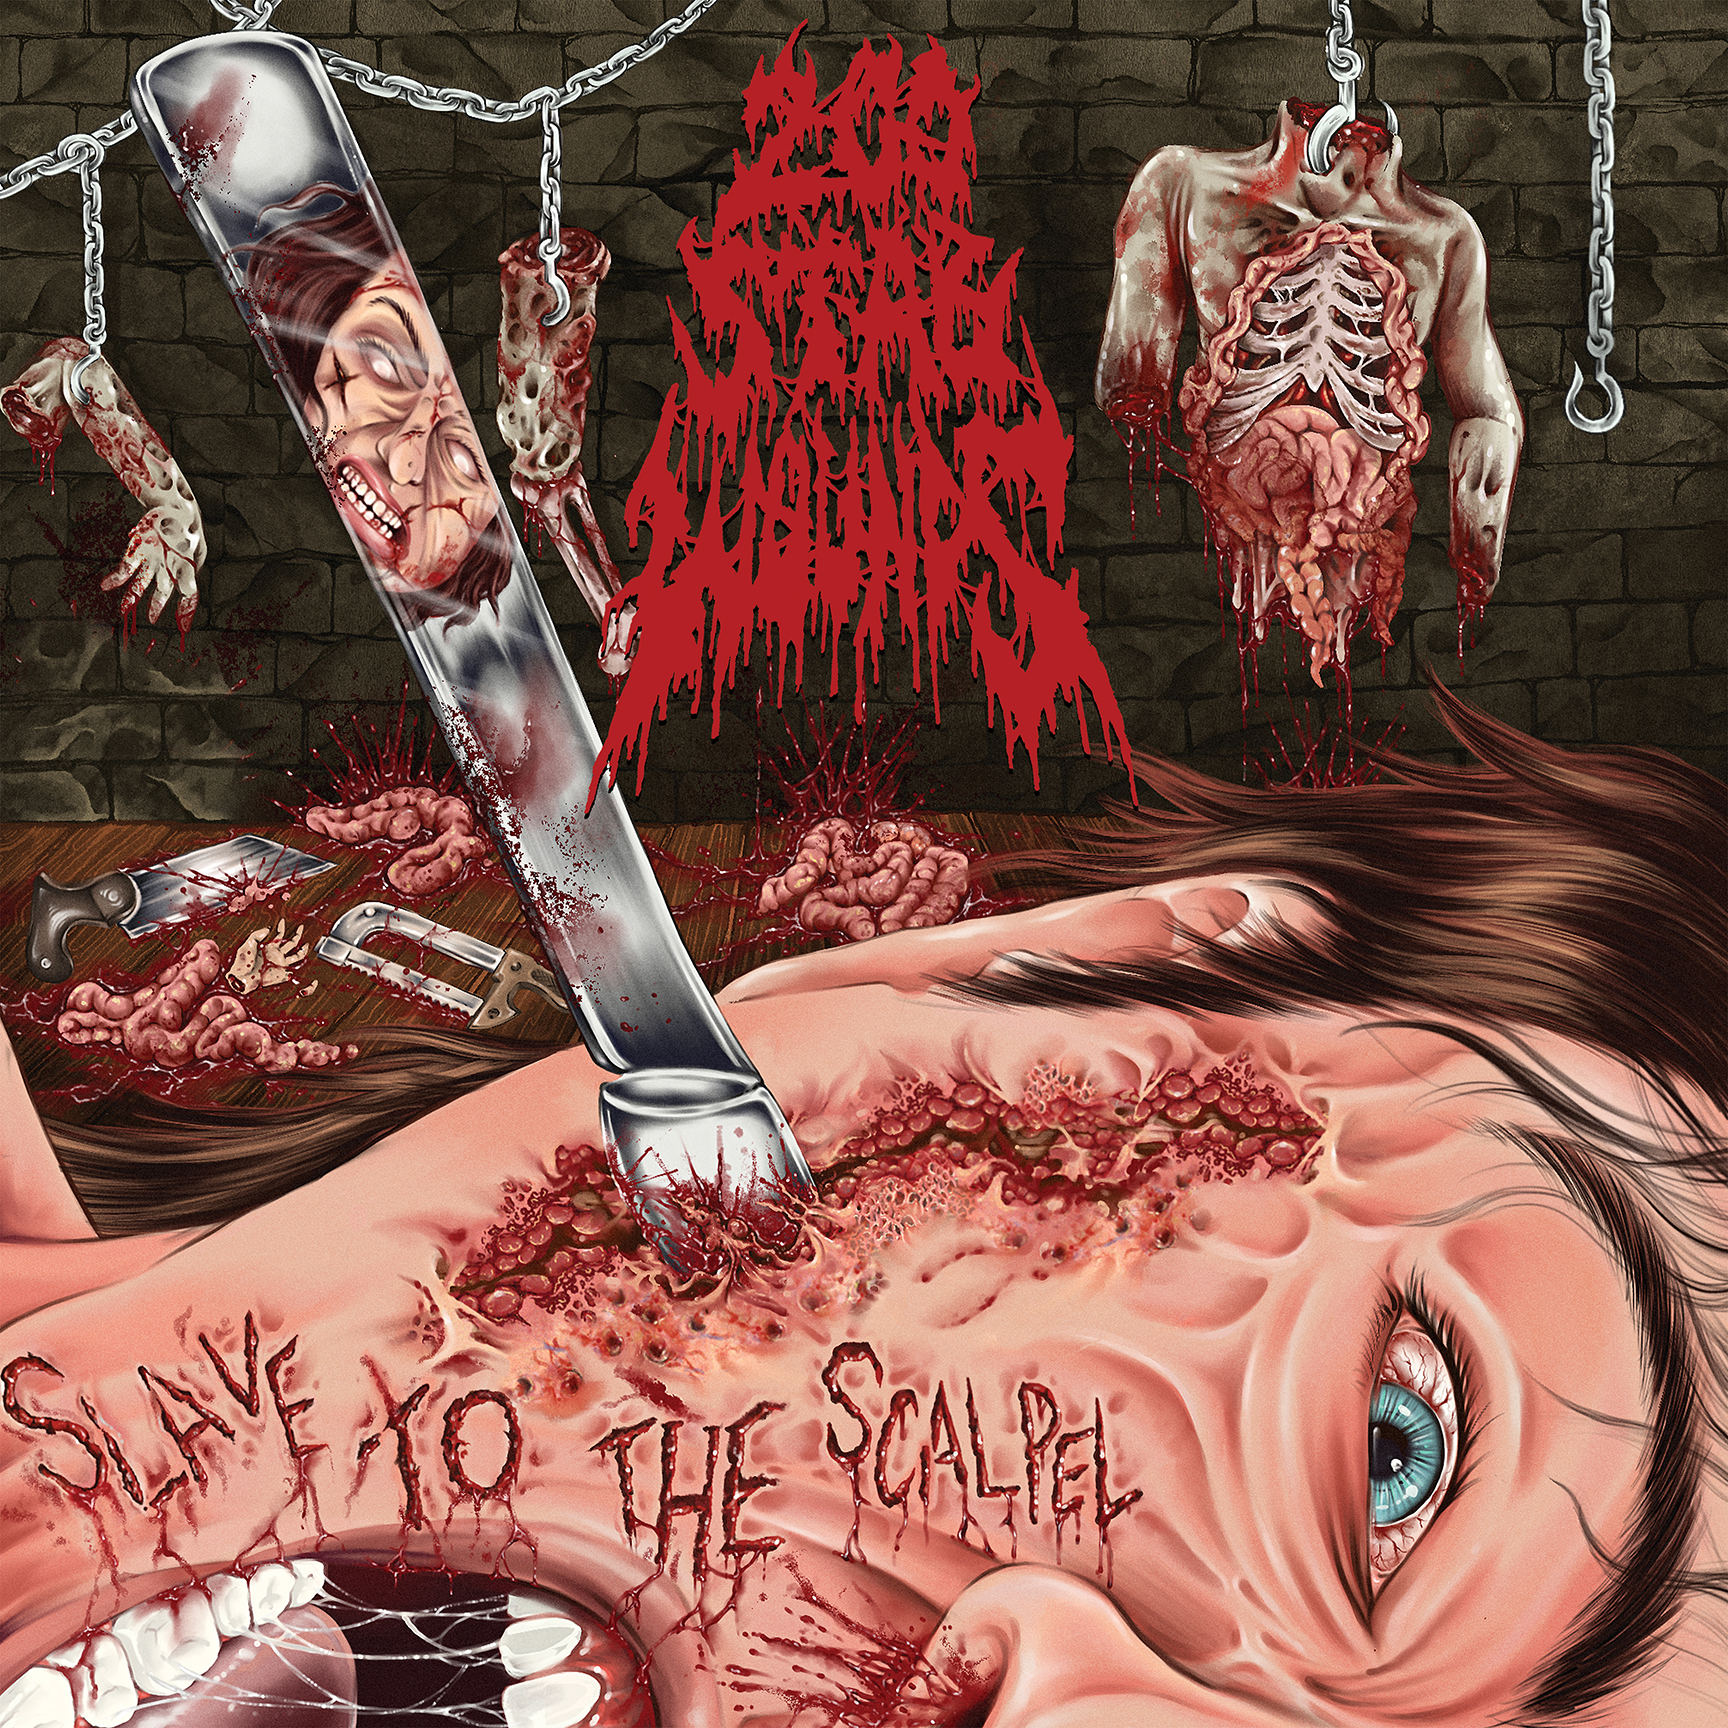 200 STAB WOUNDS: Revolver Magazine Streams Slave To The Scalpel Debut LP From Cleveland Vicious Death Crew; Album Sees Release Friday Through Maggot Stomp